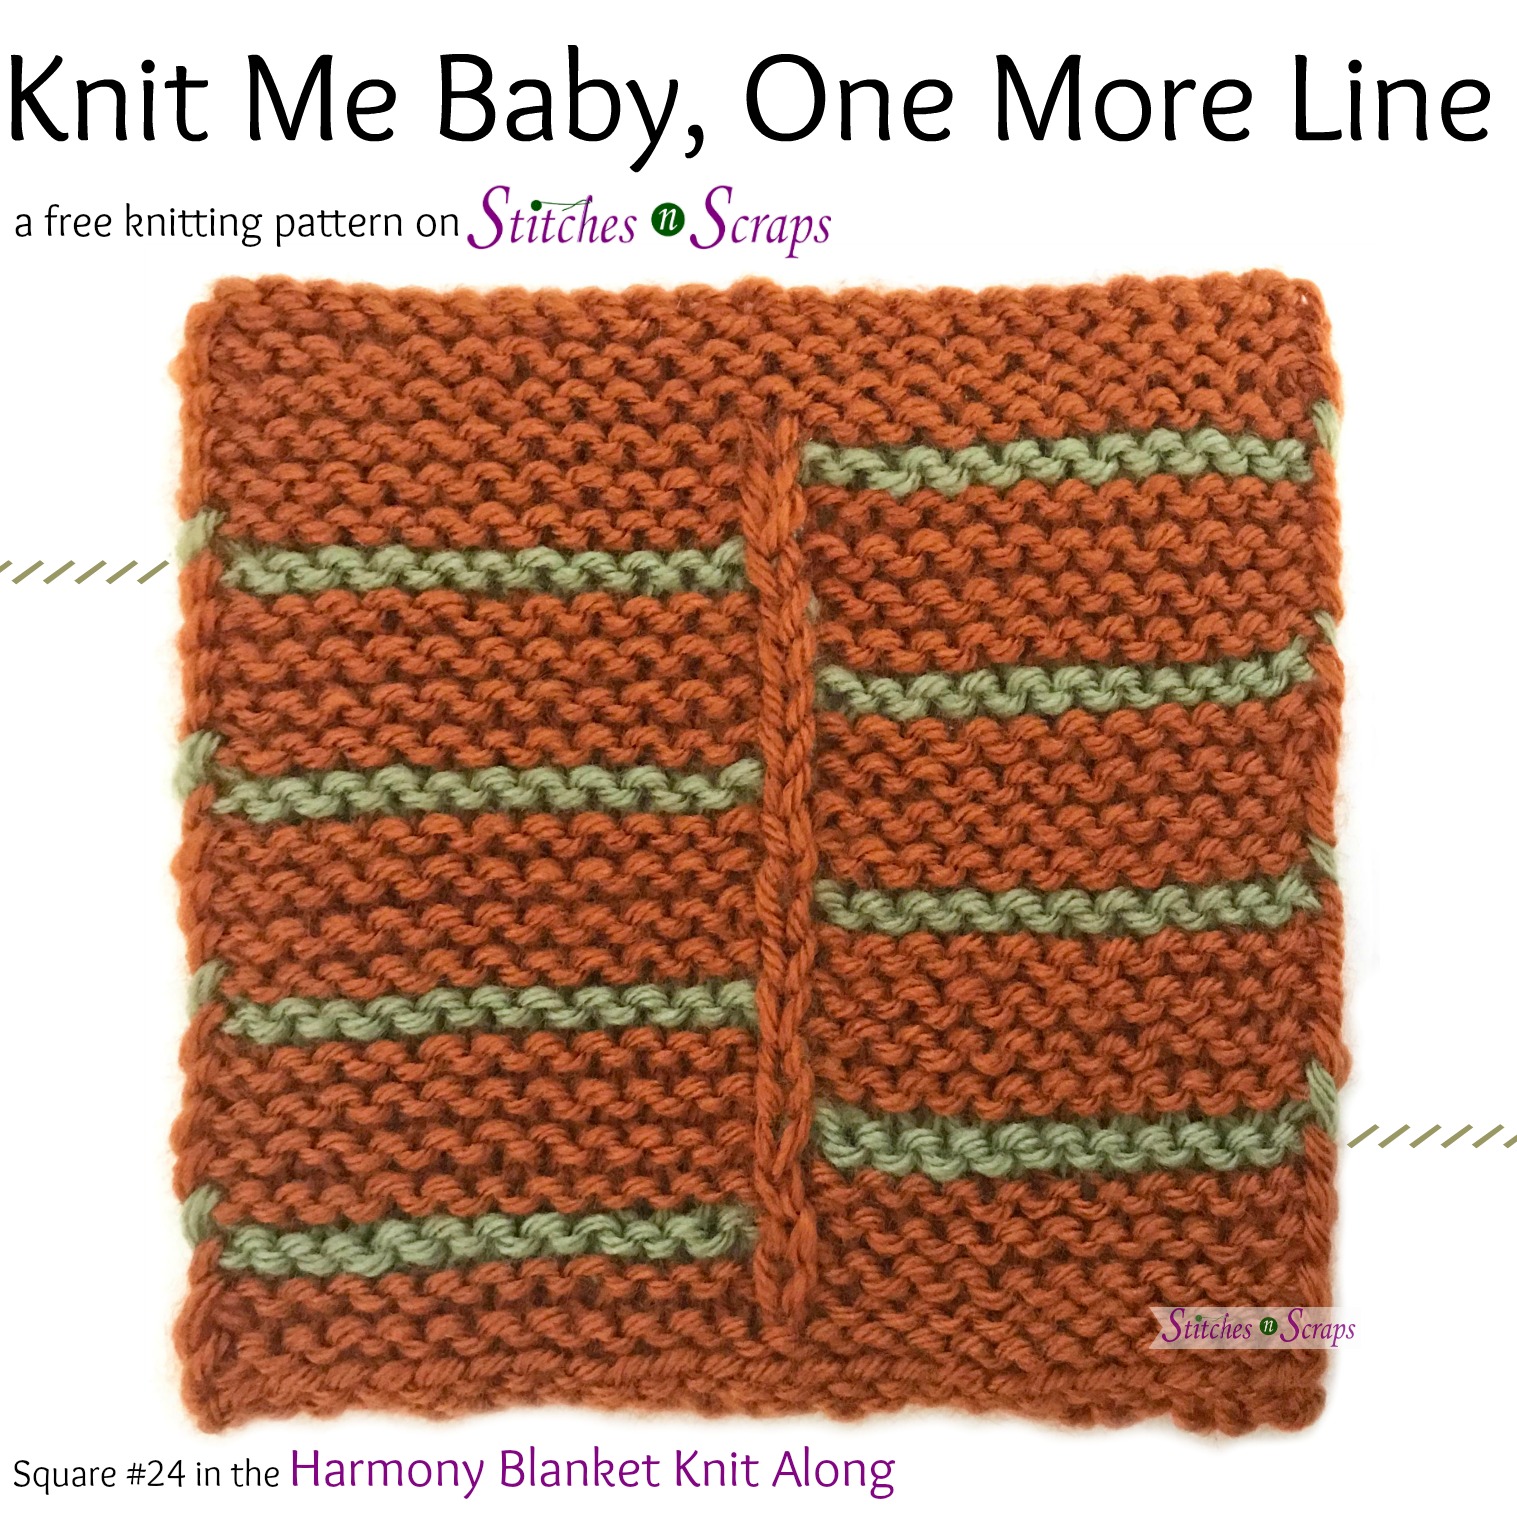 Knit Me Baby One More Line - A free pattern on Stitches n Scraps.com